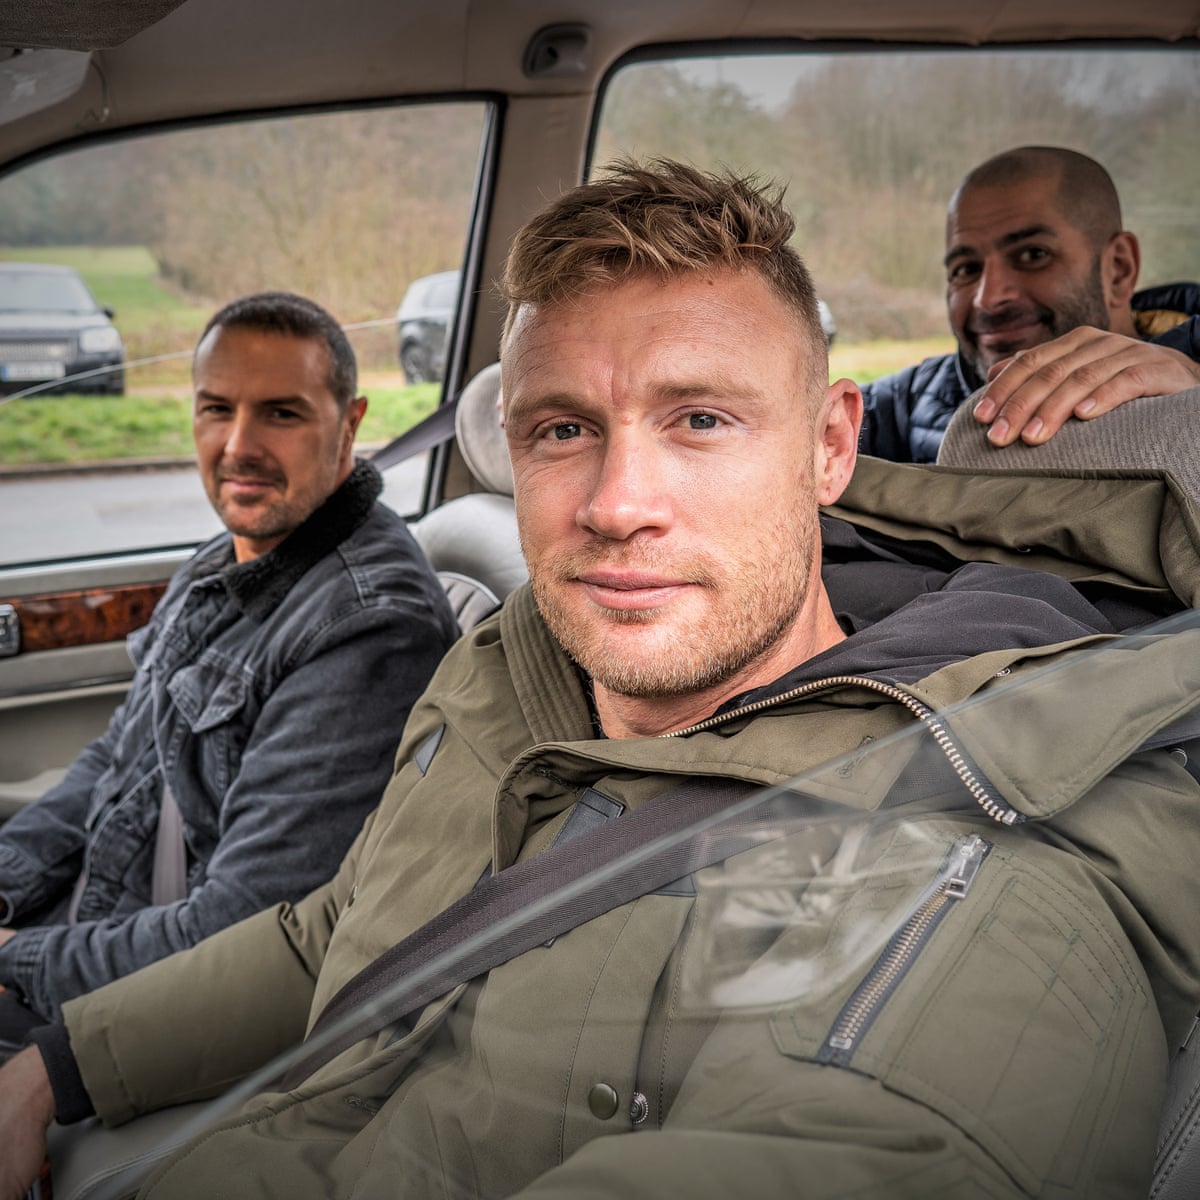 TV tonight: petrolheads assemble ... Top Gear is back | Television | The Guardian